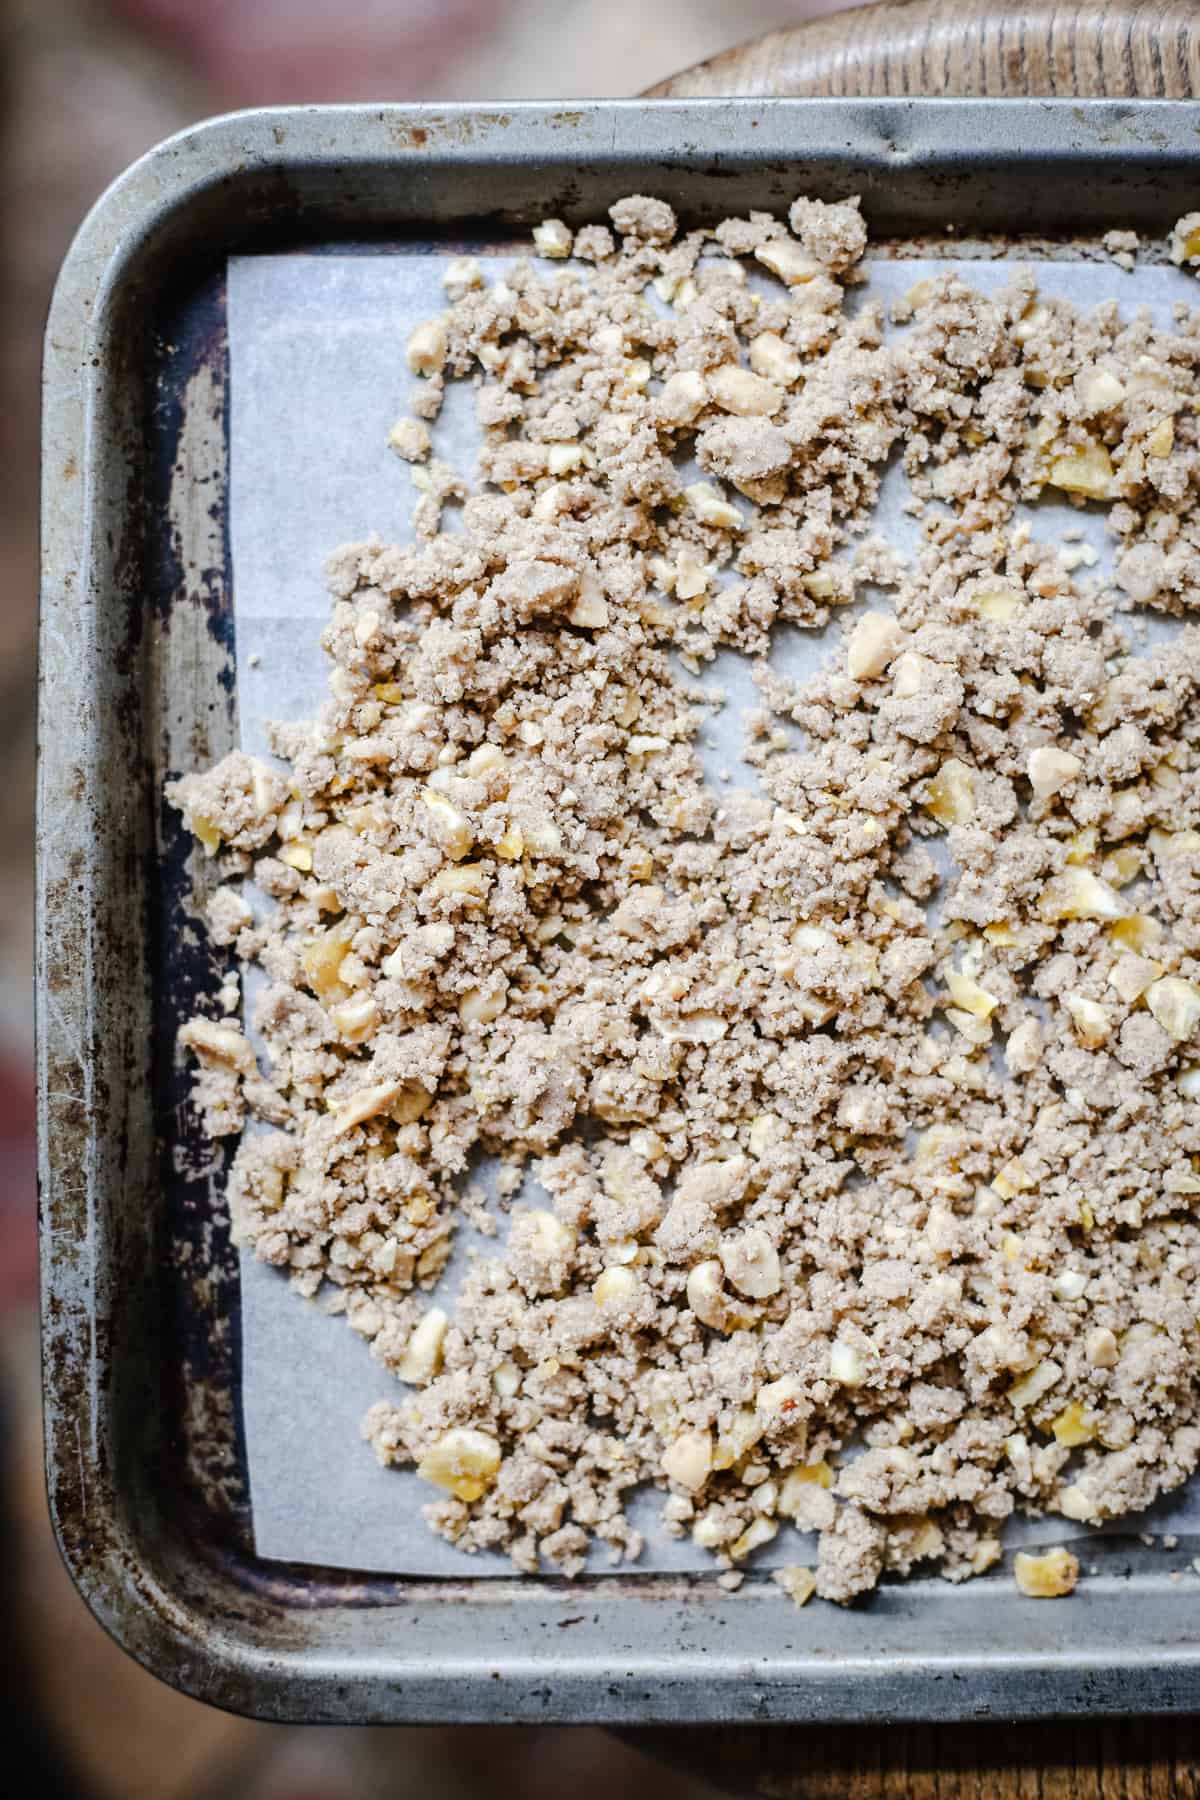 Banana streusel topping on a tray